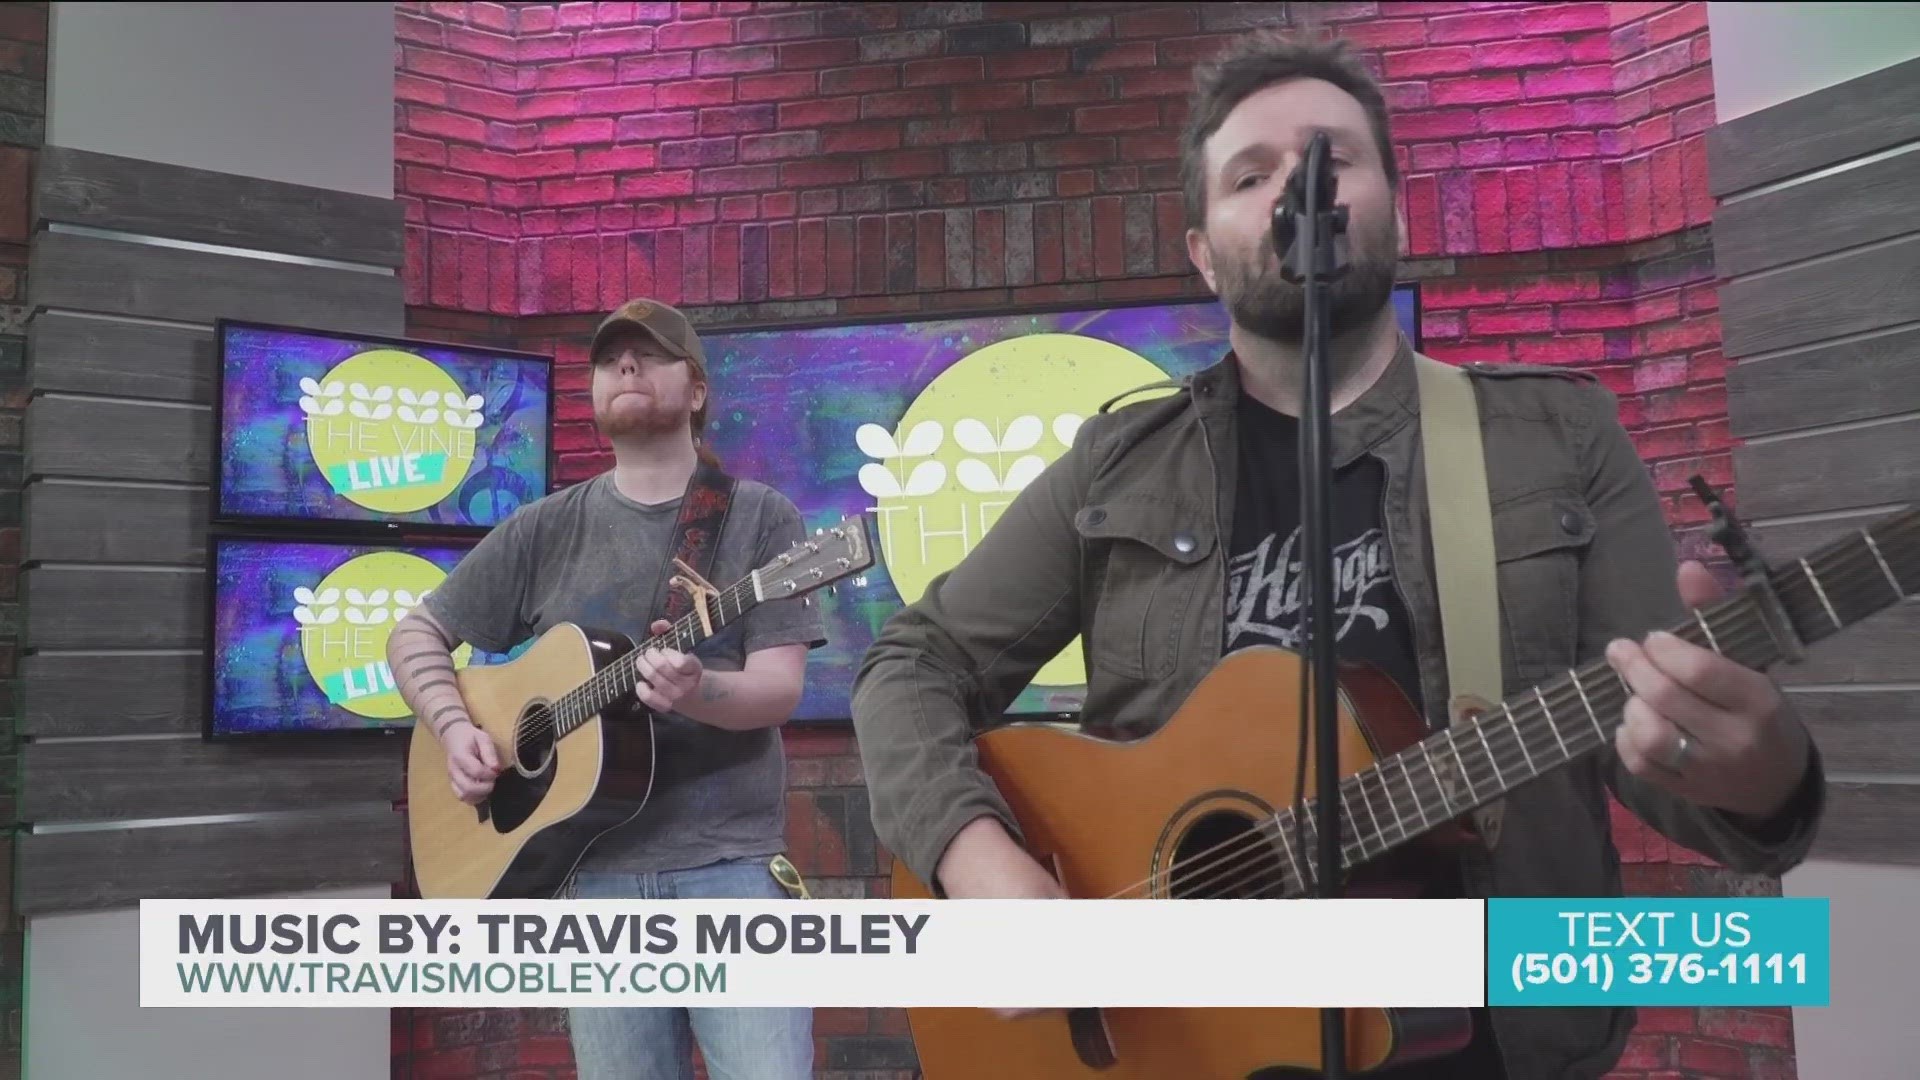 Local musician, Travis Mobley tells us about the inspiration behind his new song.